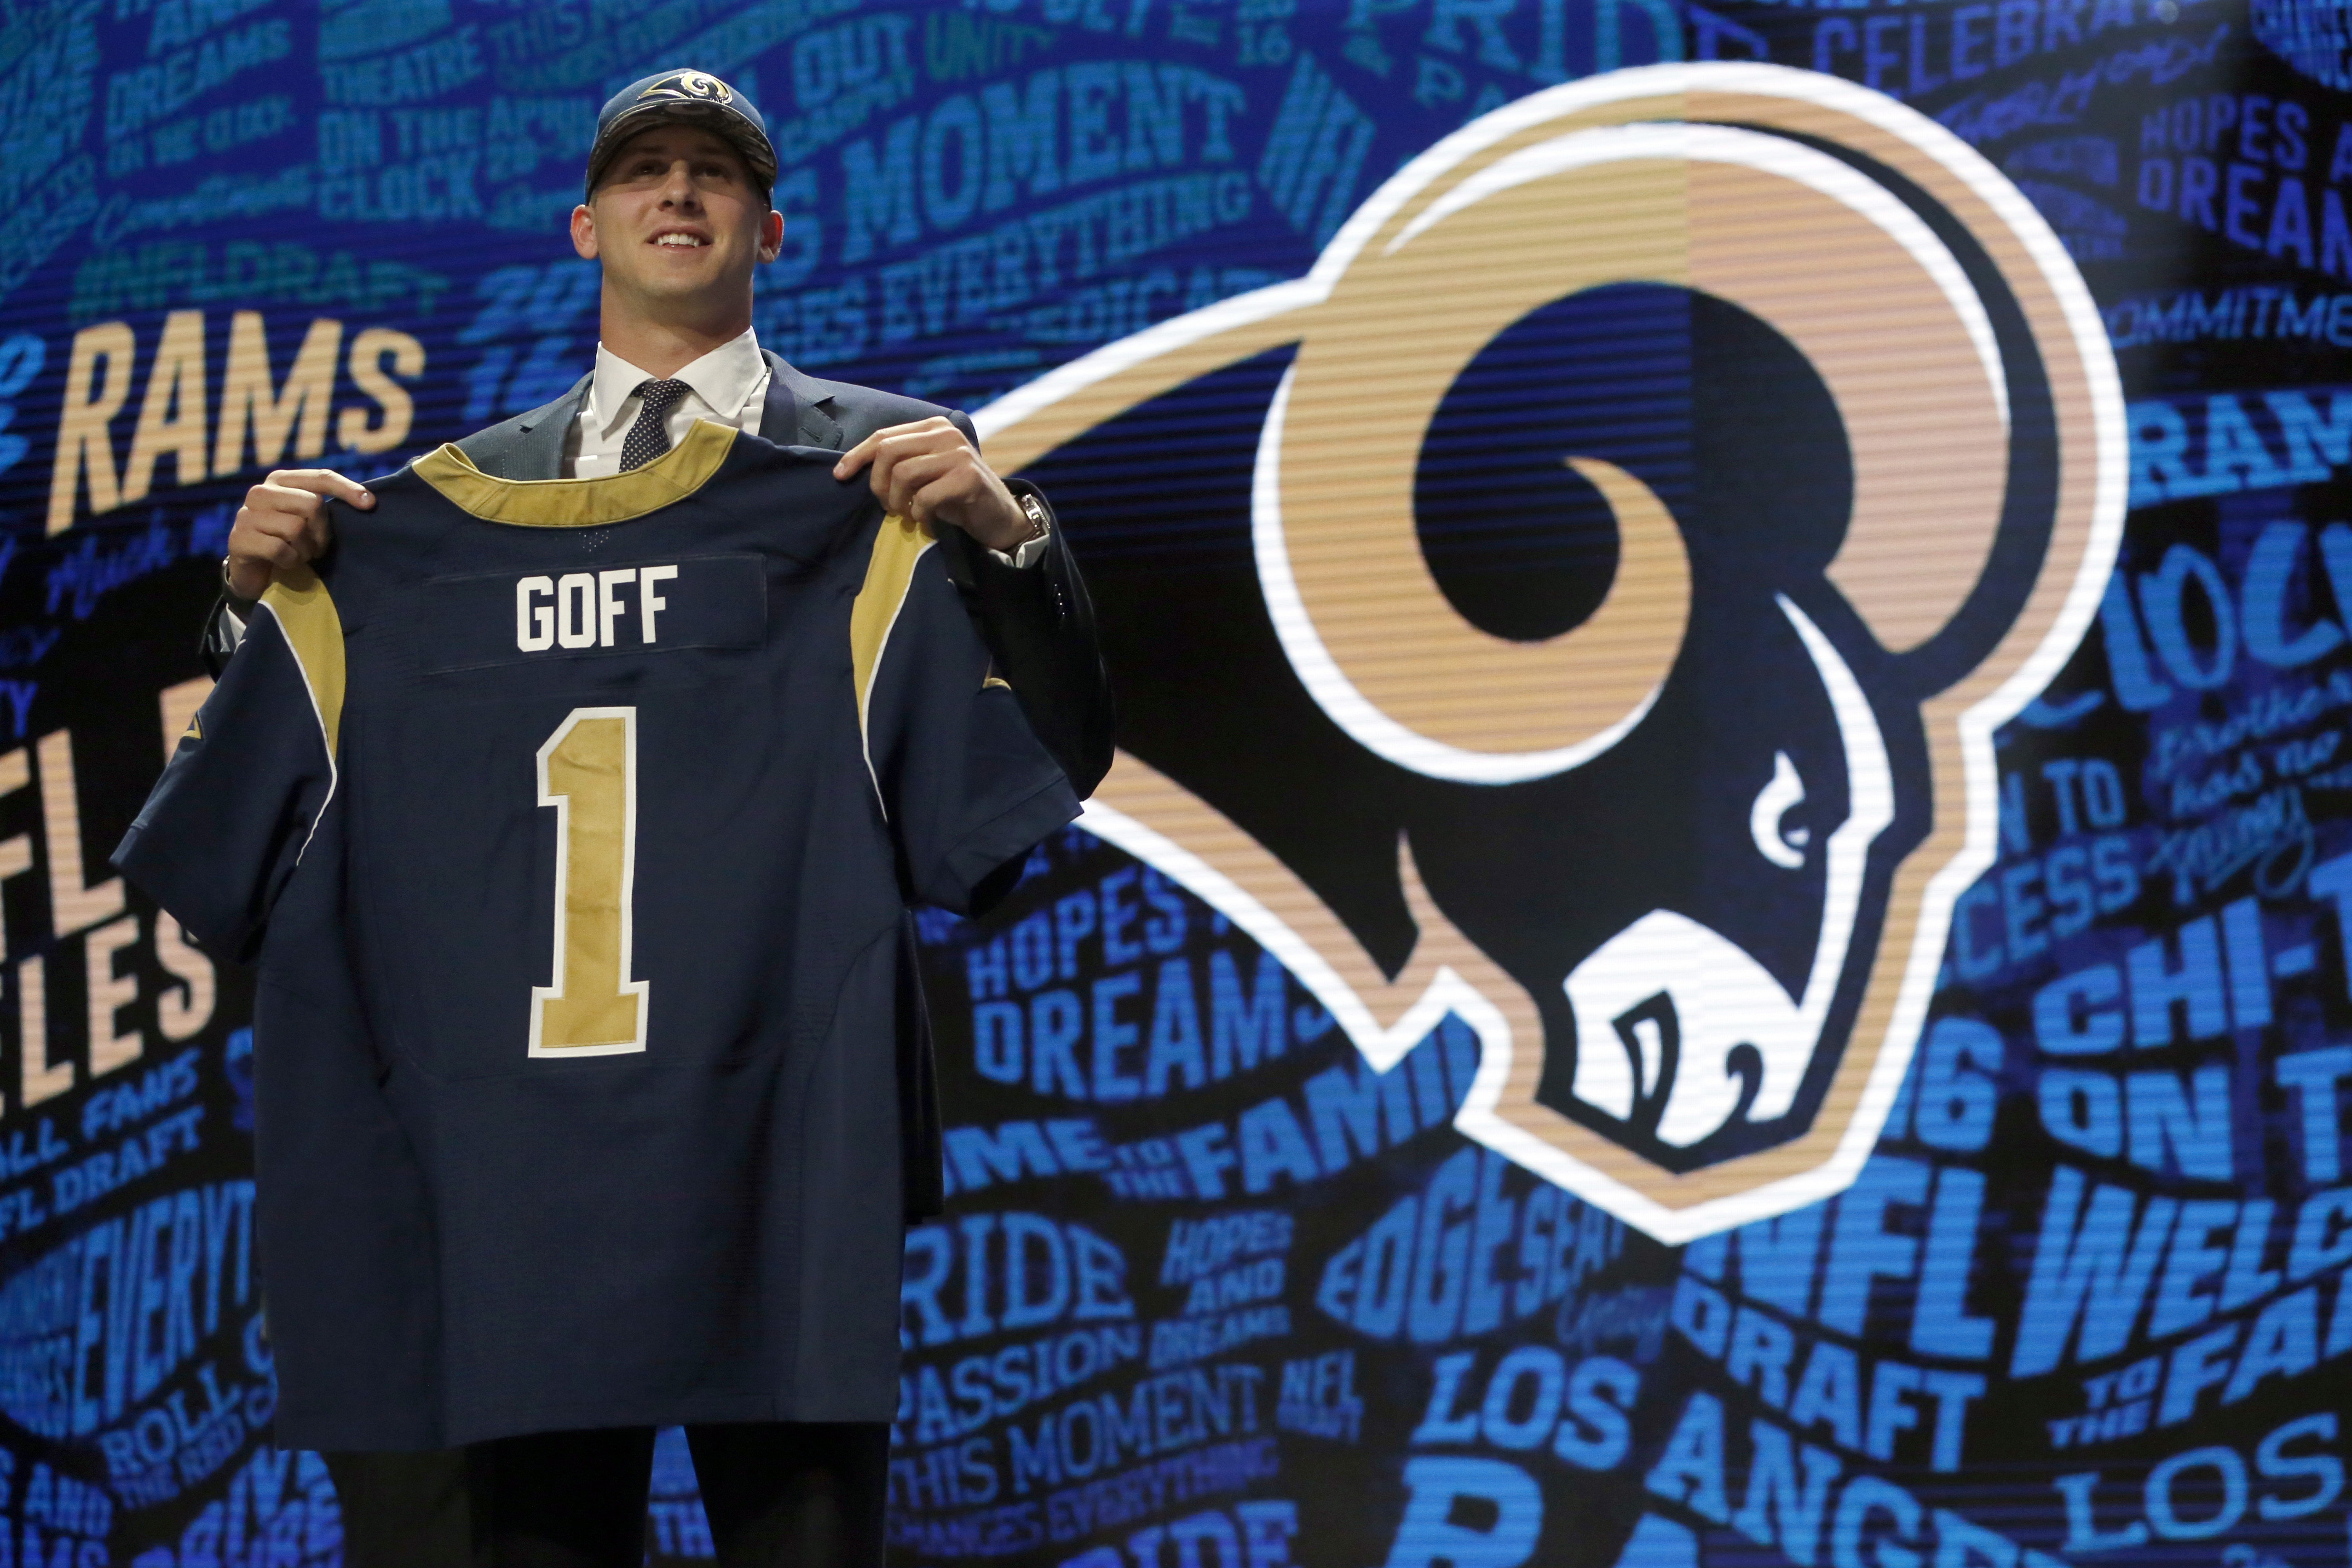 QB Jared Goff goes to Rams with No. 1 NFL draft pick - CBS News